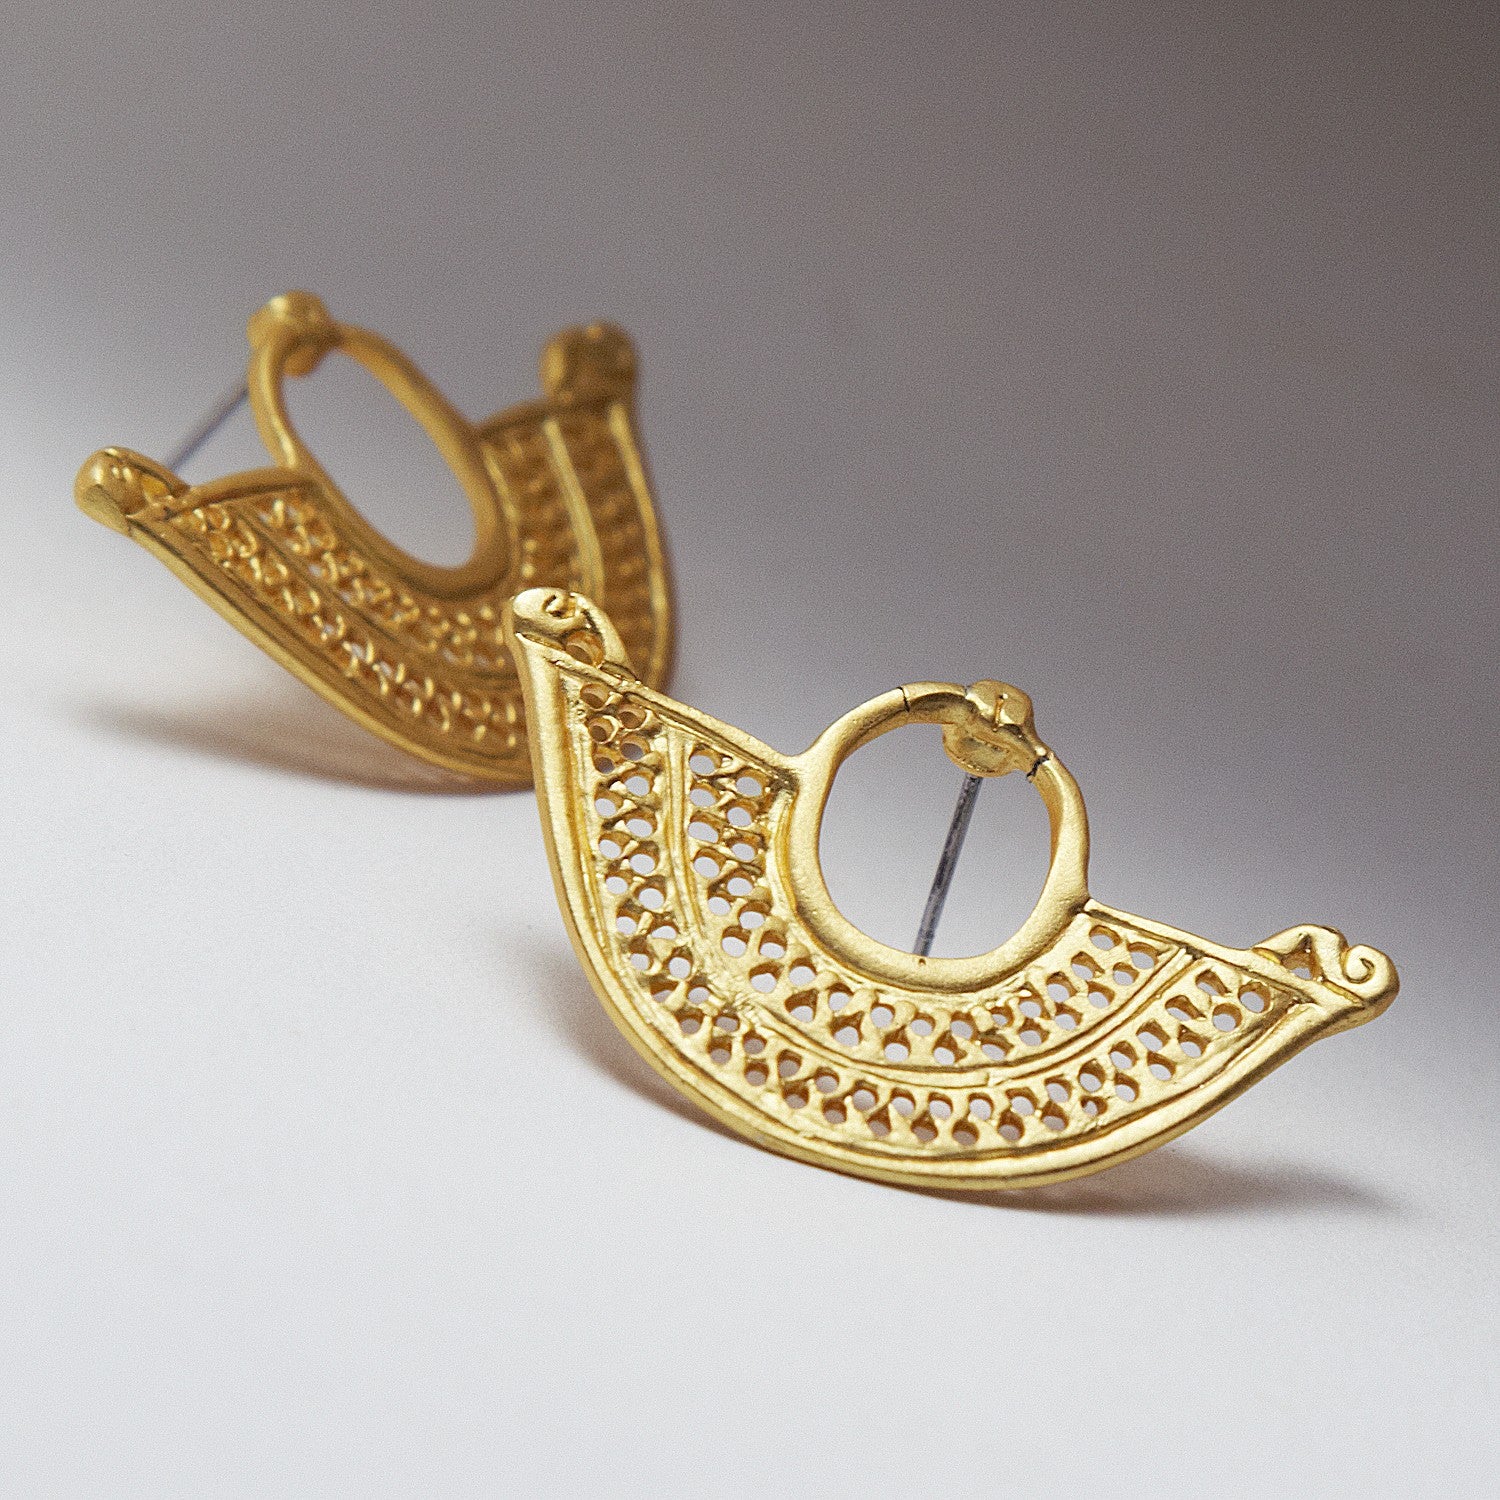 Poet's Gold Earrings. Authentic Fair Trade Product. Ethically sourced. Handcrafted in Colombia. 24K Gold Fill